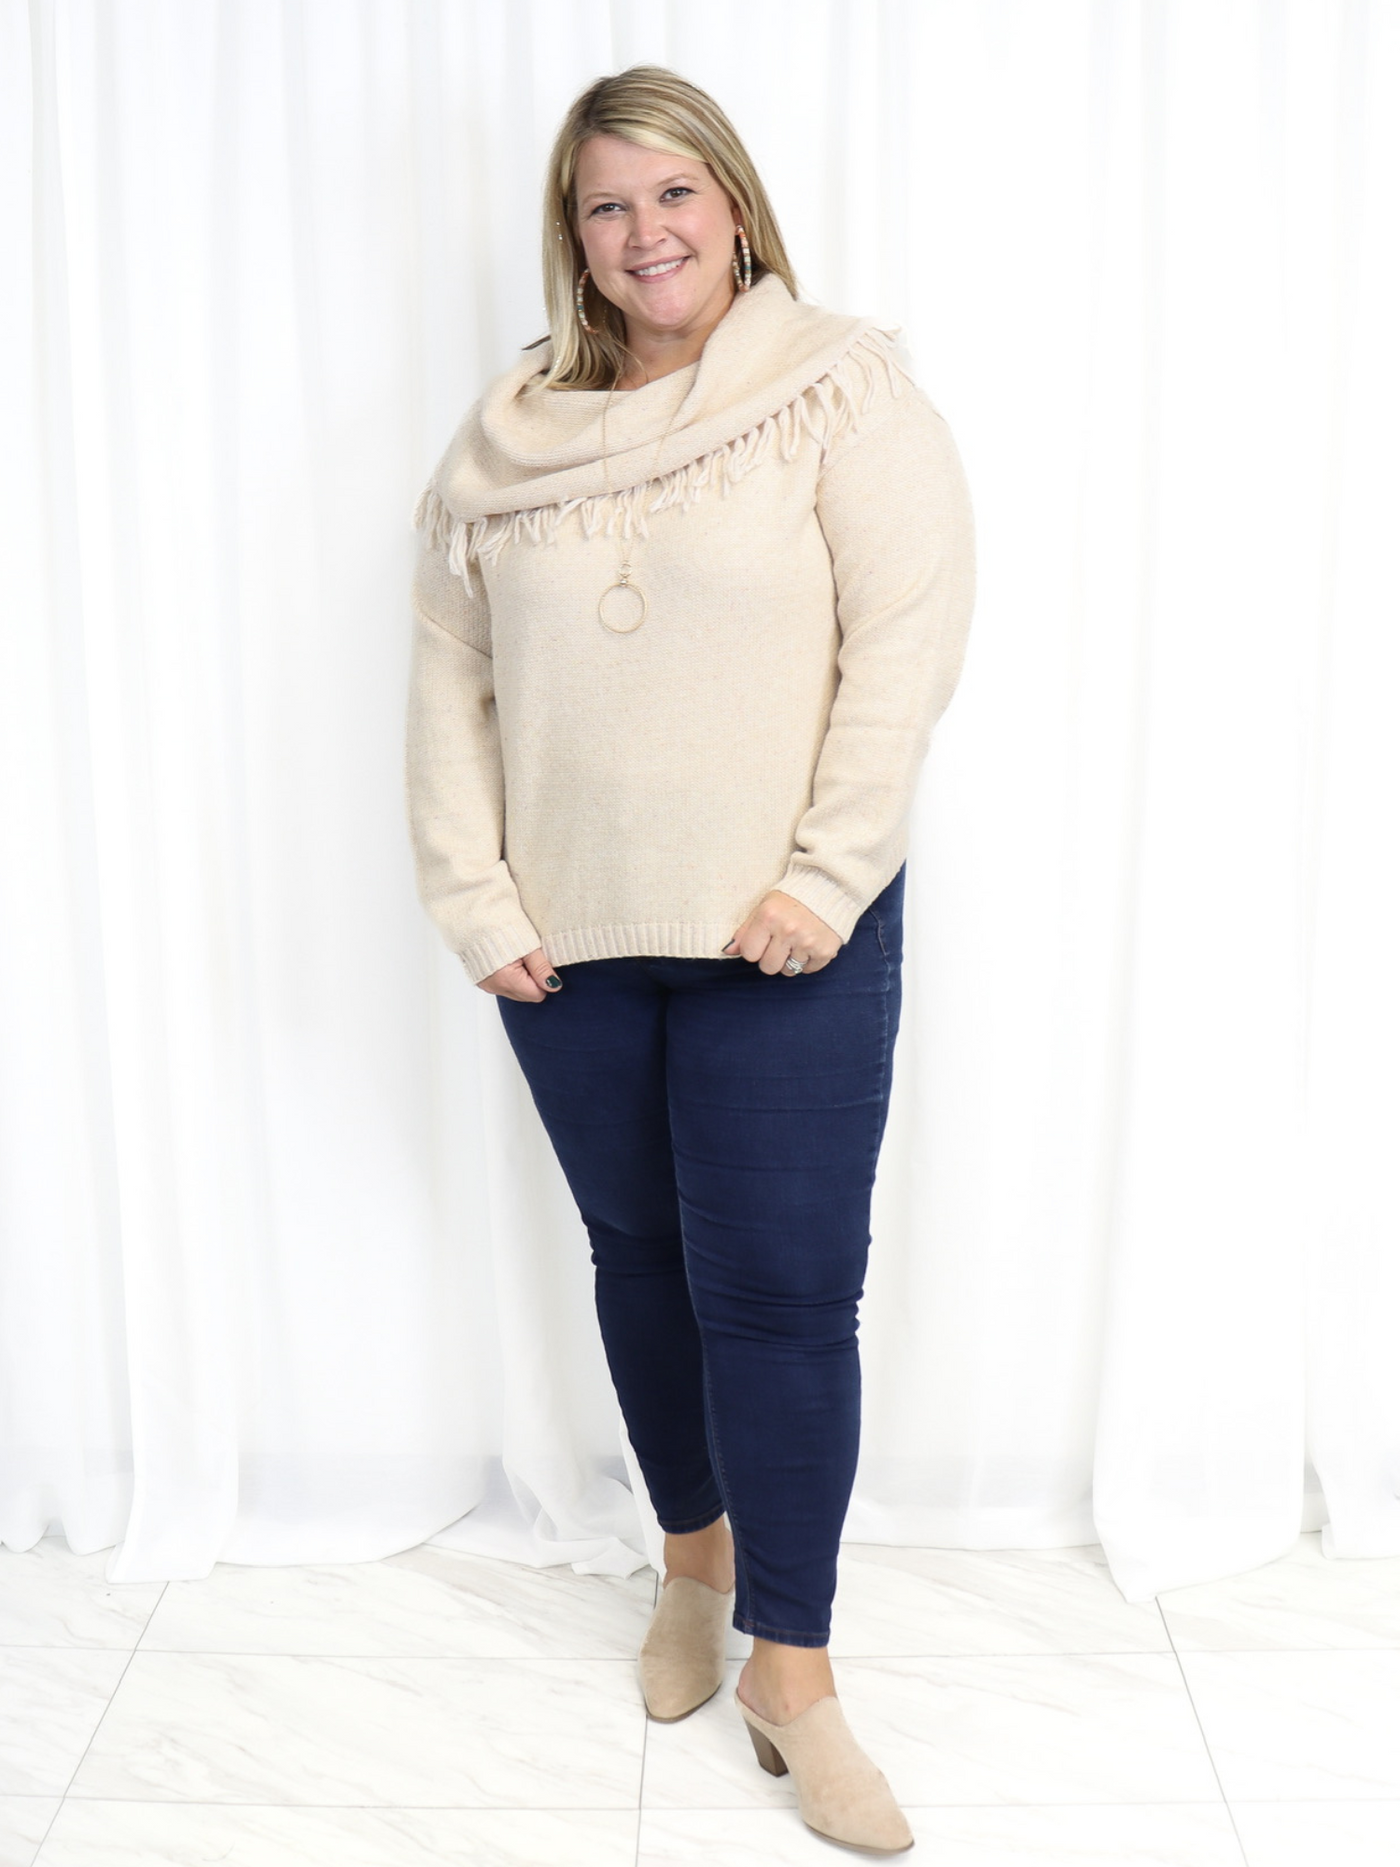 Tan Fringed Cowl Neck Sweater 